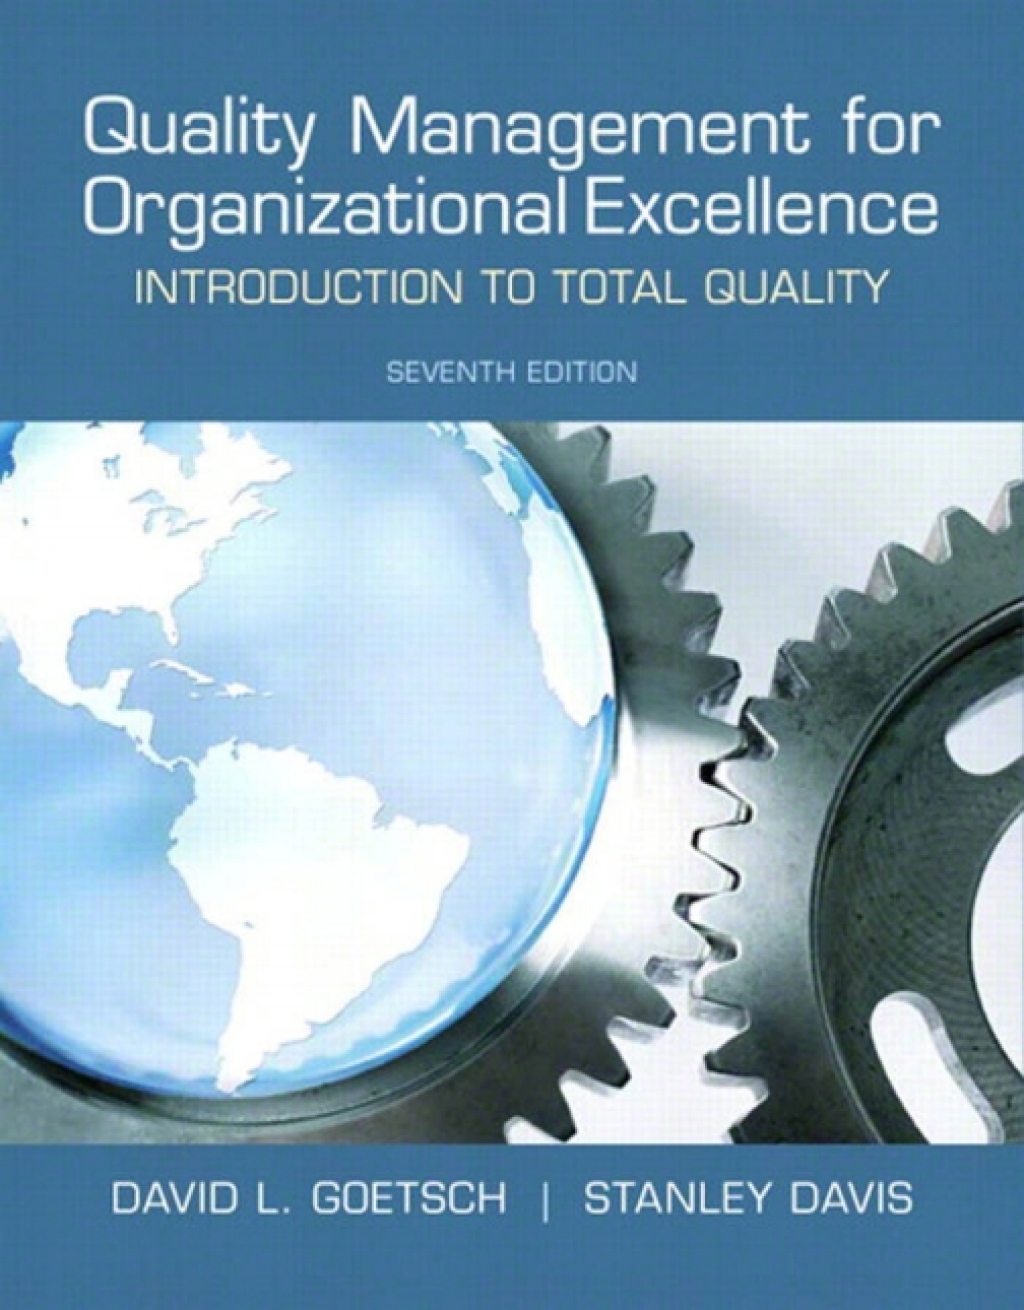 Quality Management for Organizational Excellence (eBook) - David L. Goetsch